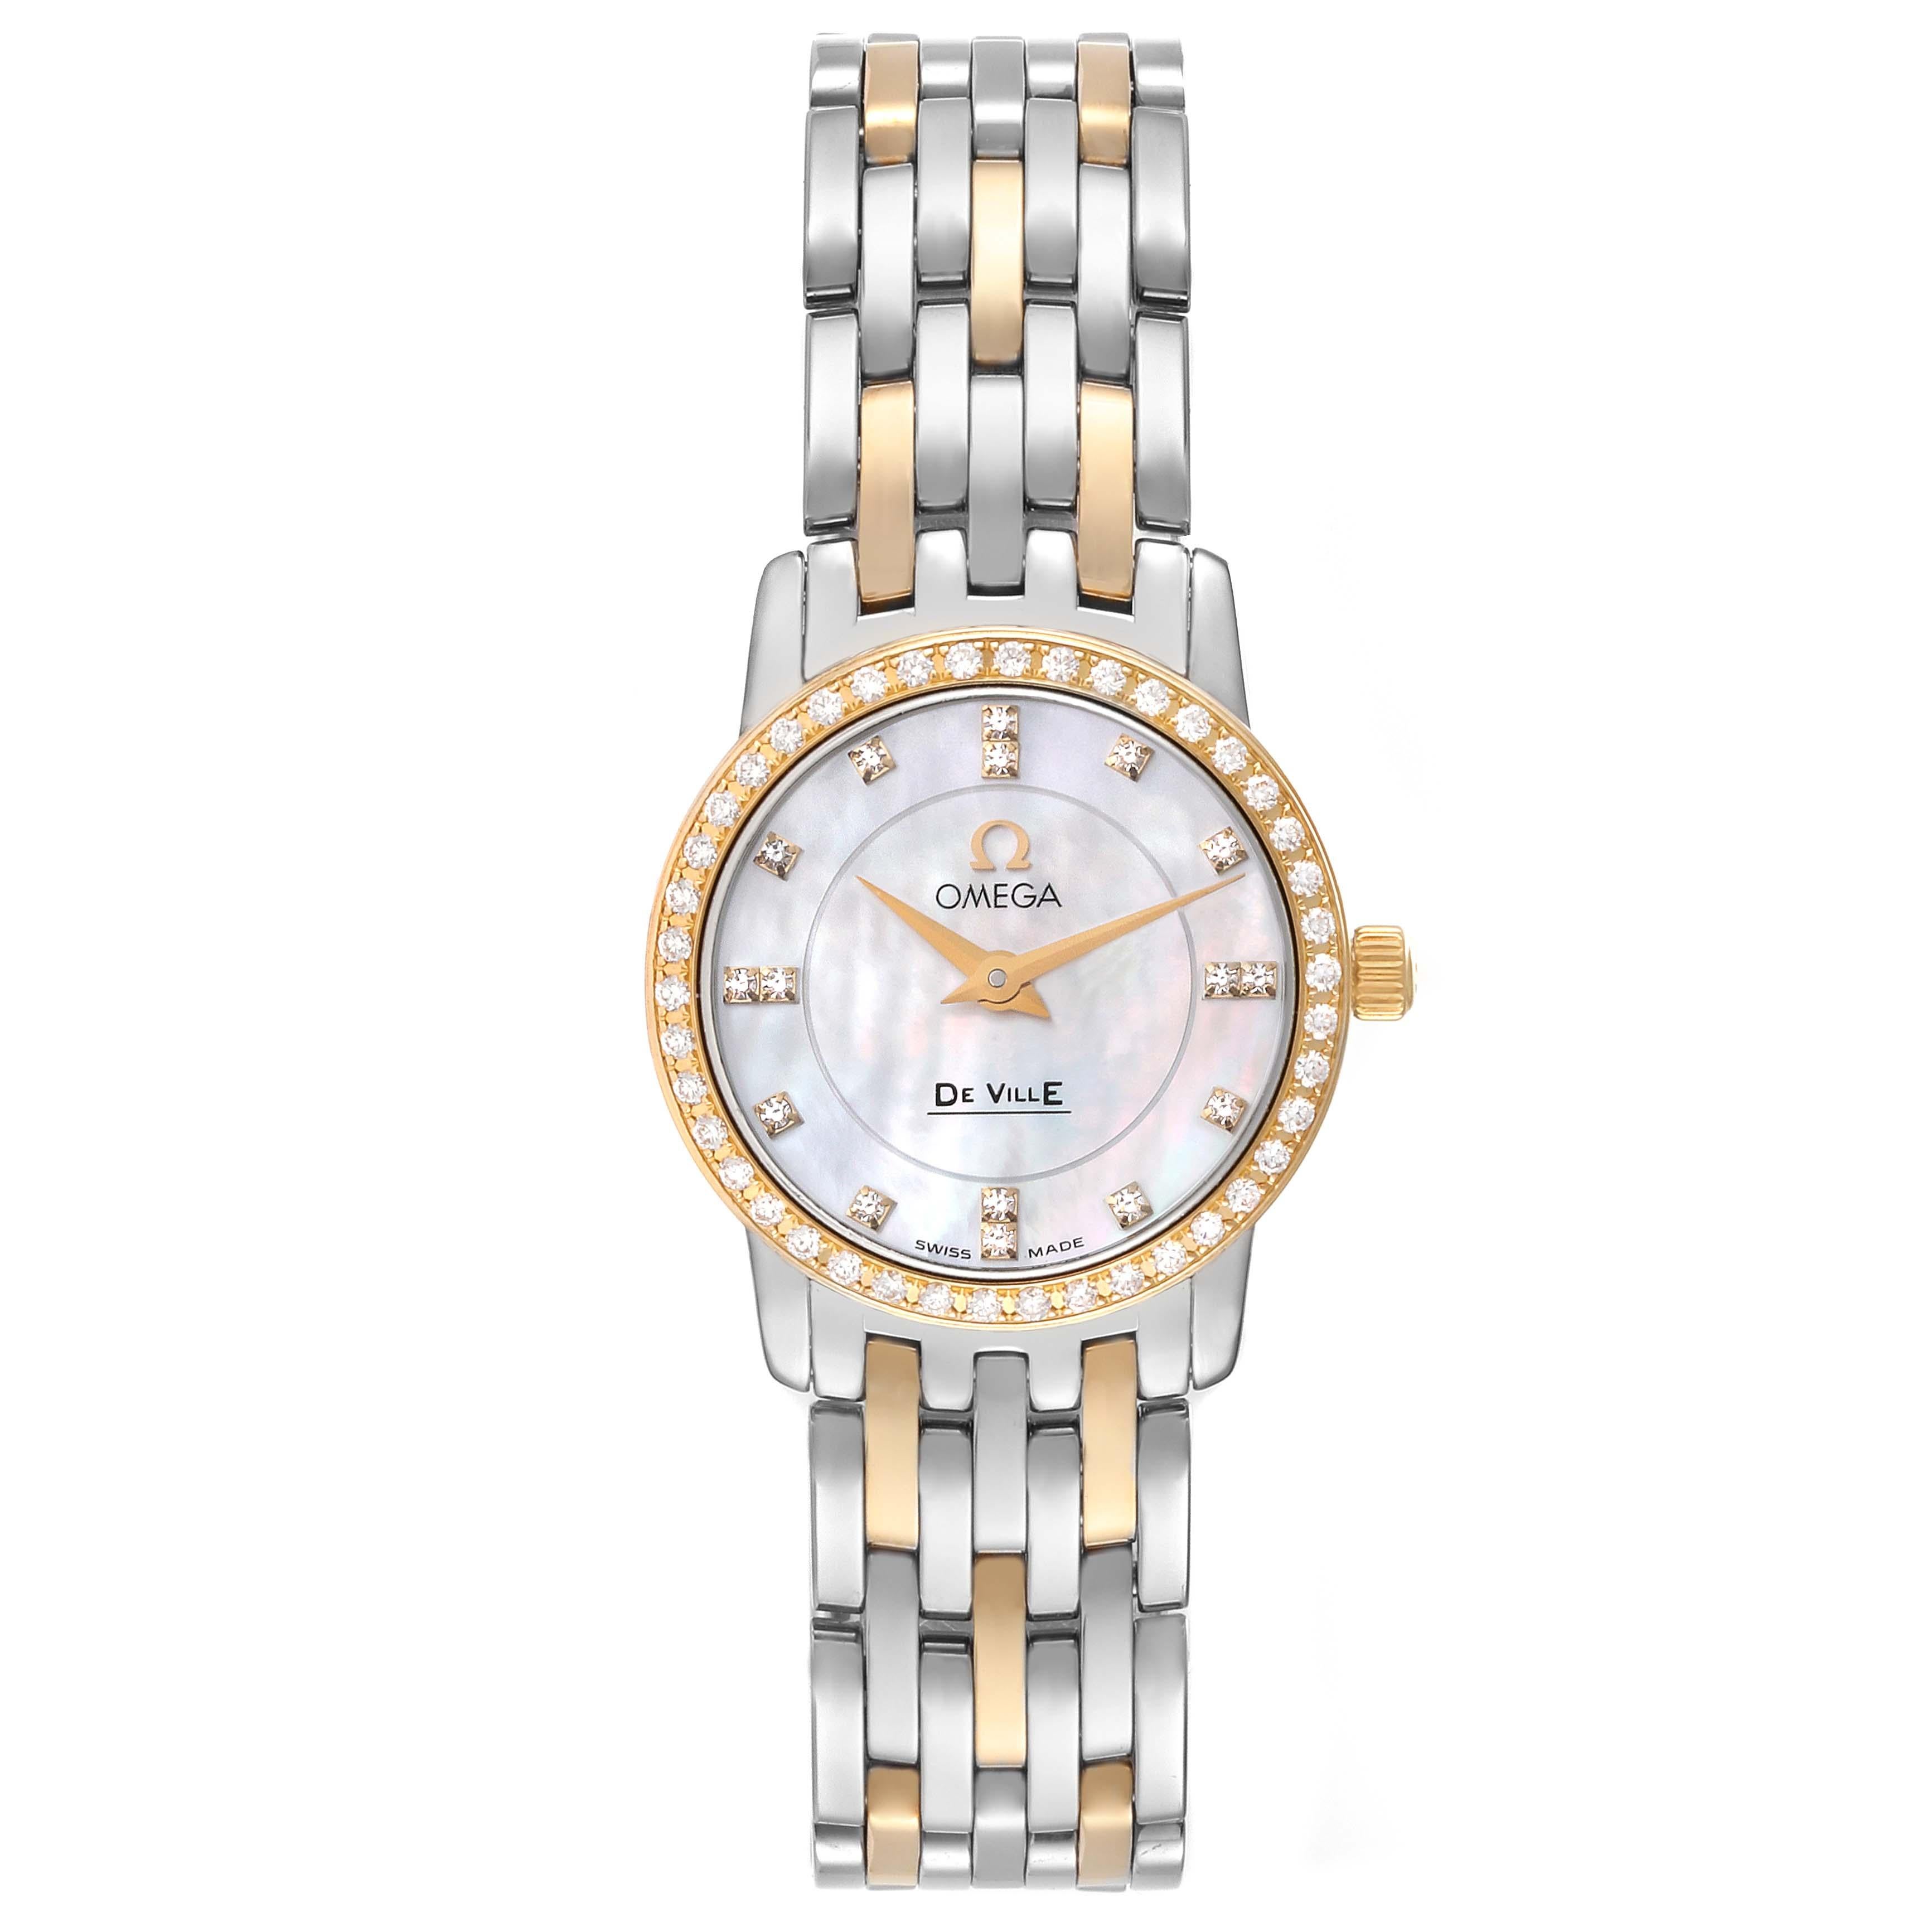 Omega DeVille MOP Diamond Steel Yellow Gold Ladies Watch 4375.75.00. Quartz movement. Stainless steel and 18K yellow gold round case 22 mm in diameter. Original Omega factory 18k yellow gold diamond bezel. Domed scratch-resistant sapphire crystal